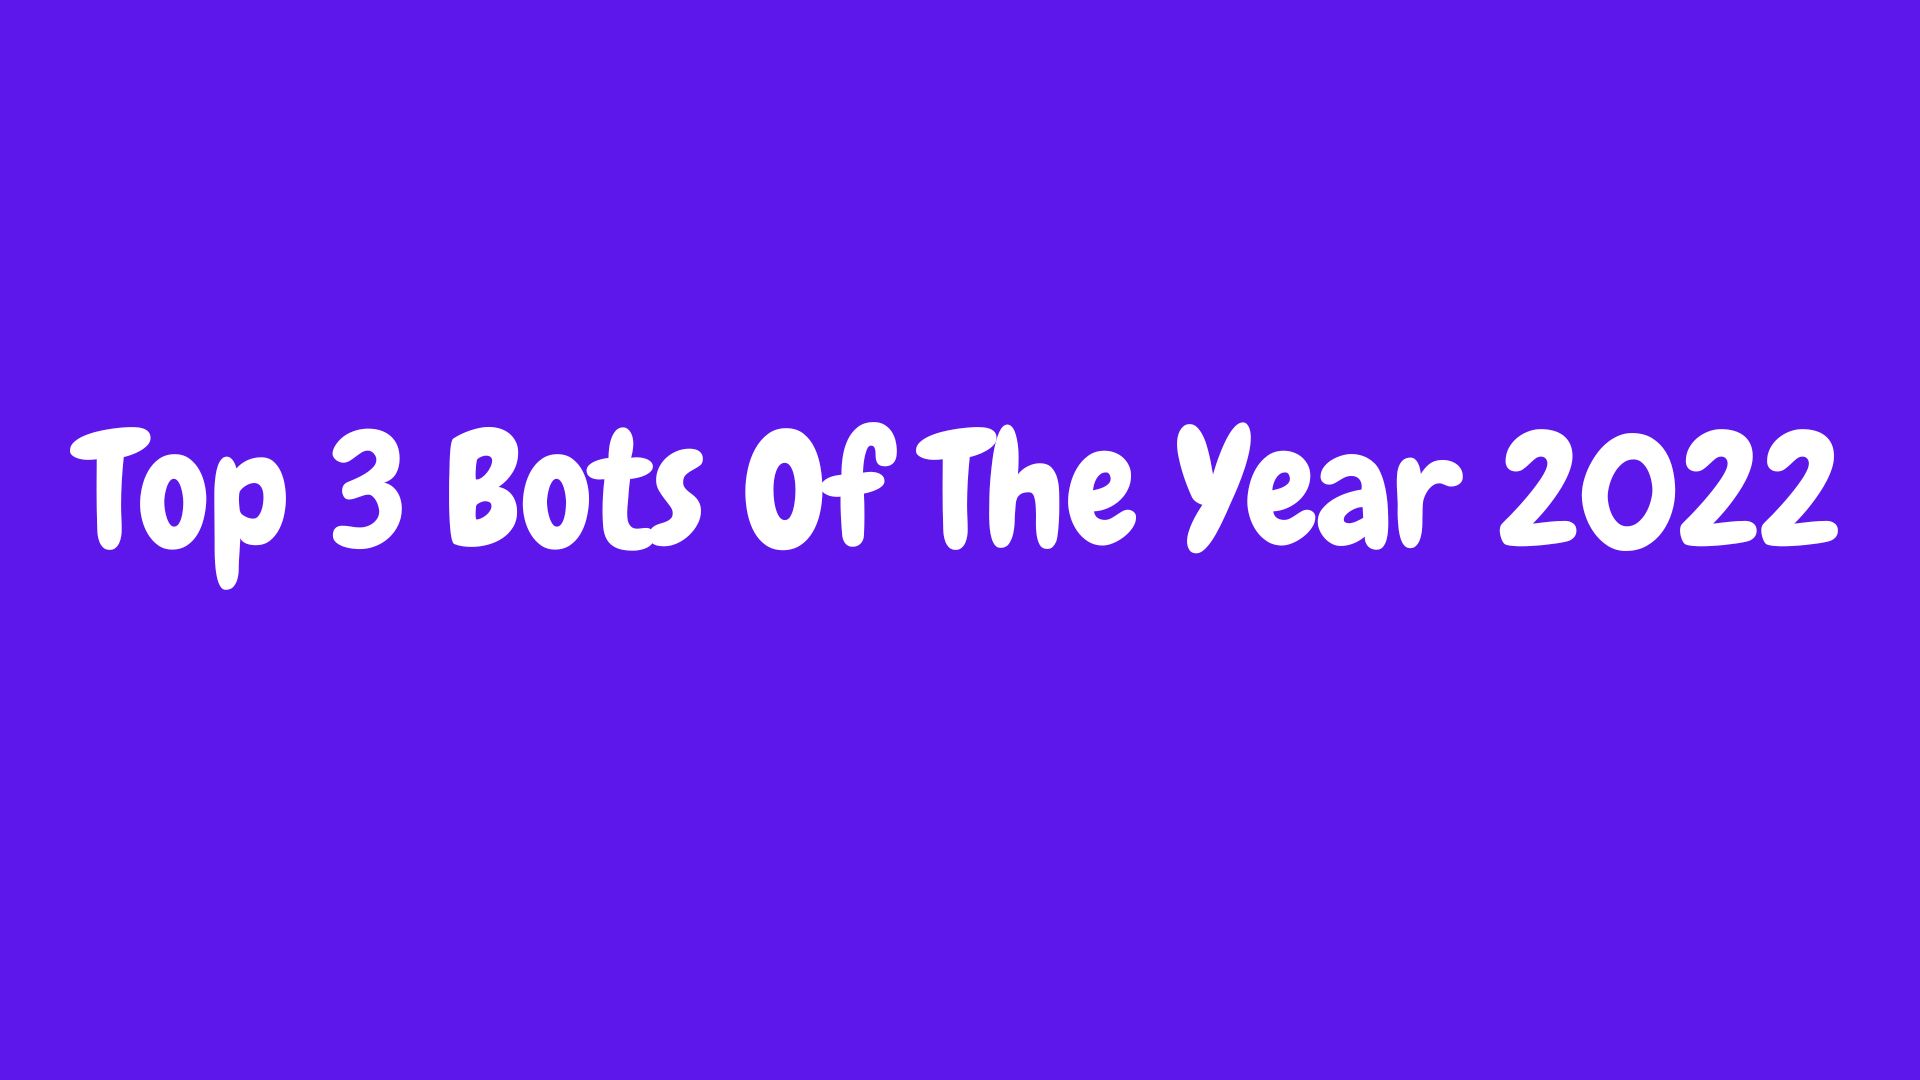 Top 3 bots of the year 2022